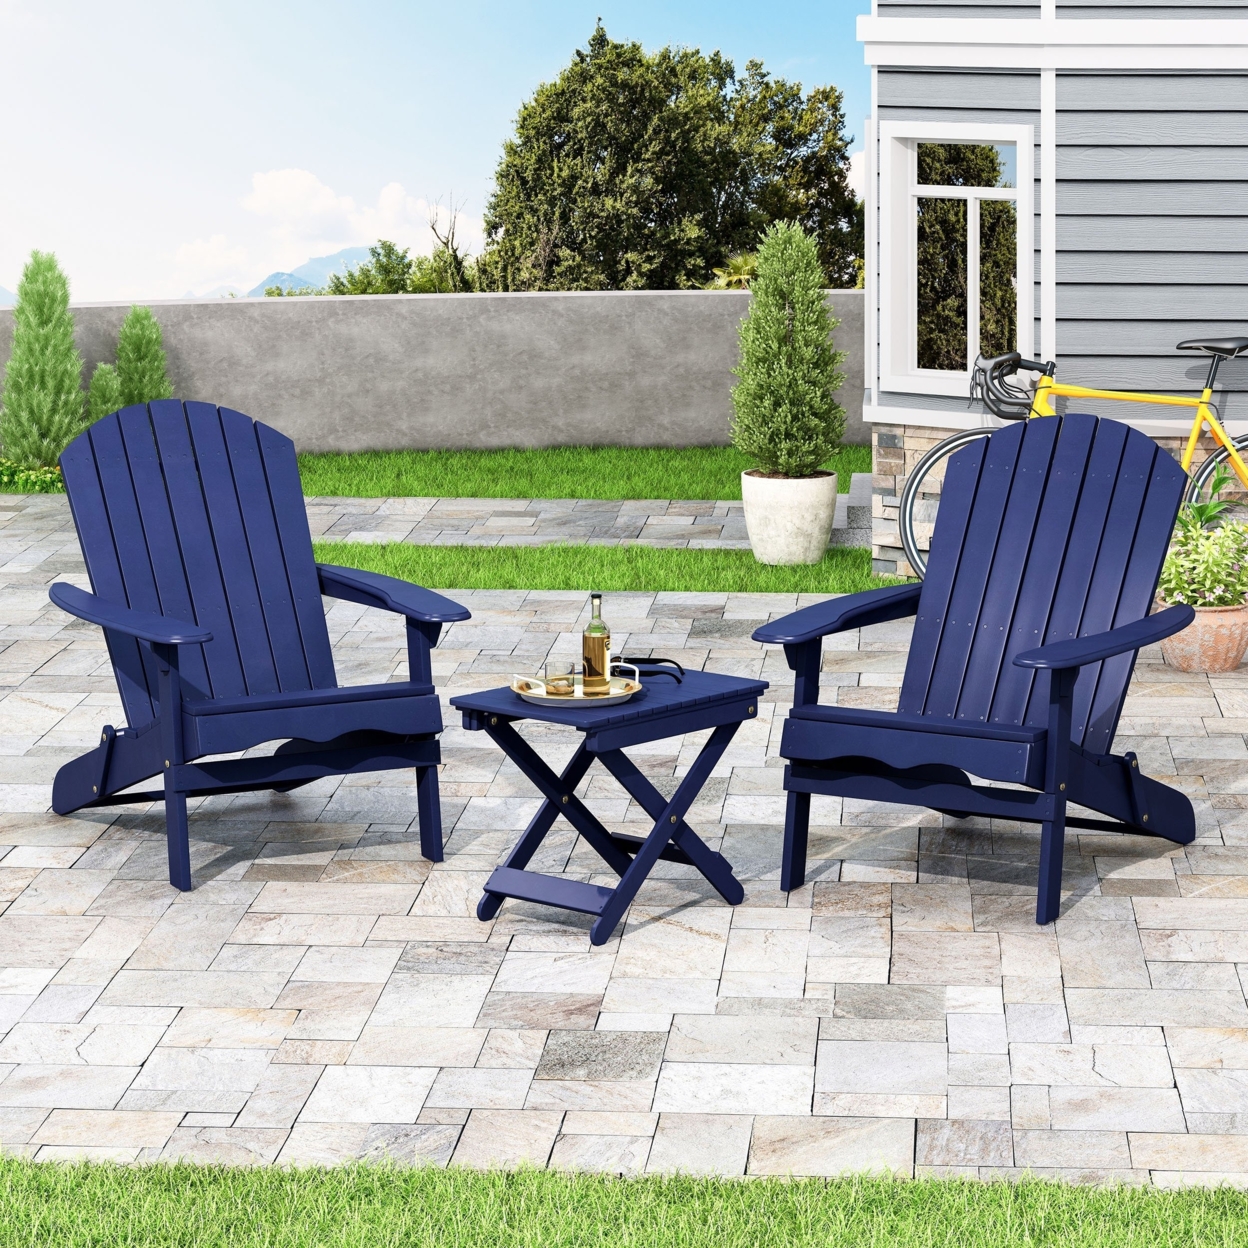 Reed Outdoor 2 Seater Acacia Wood Chat Set - Navy Blue